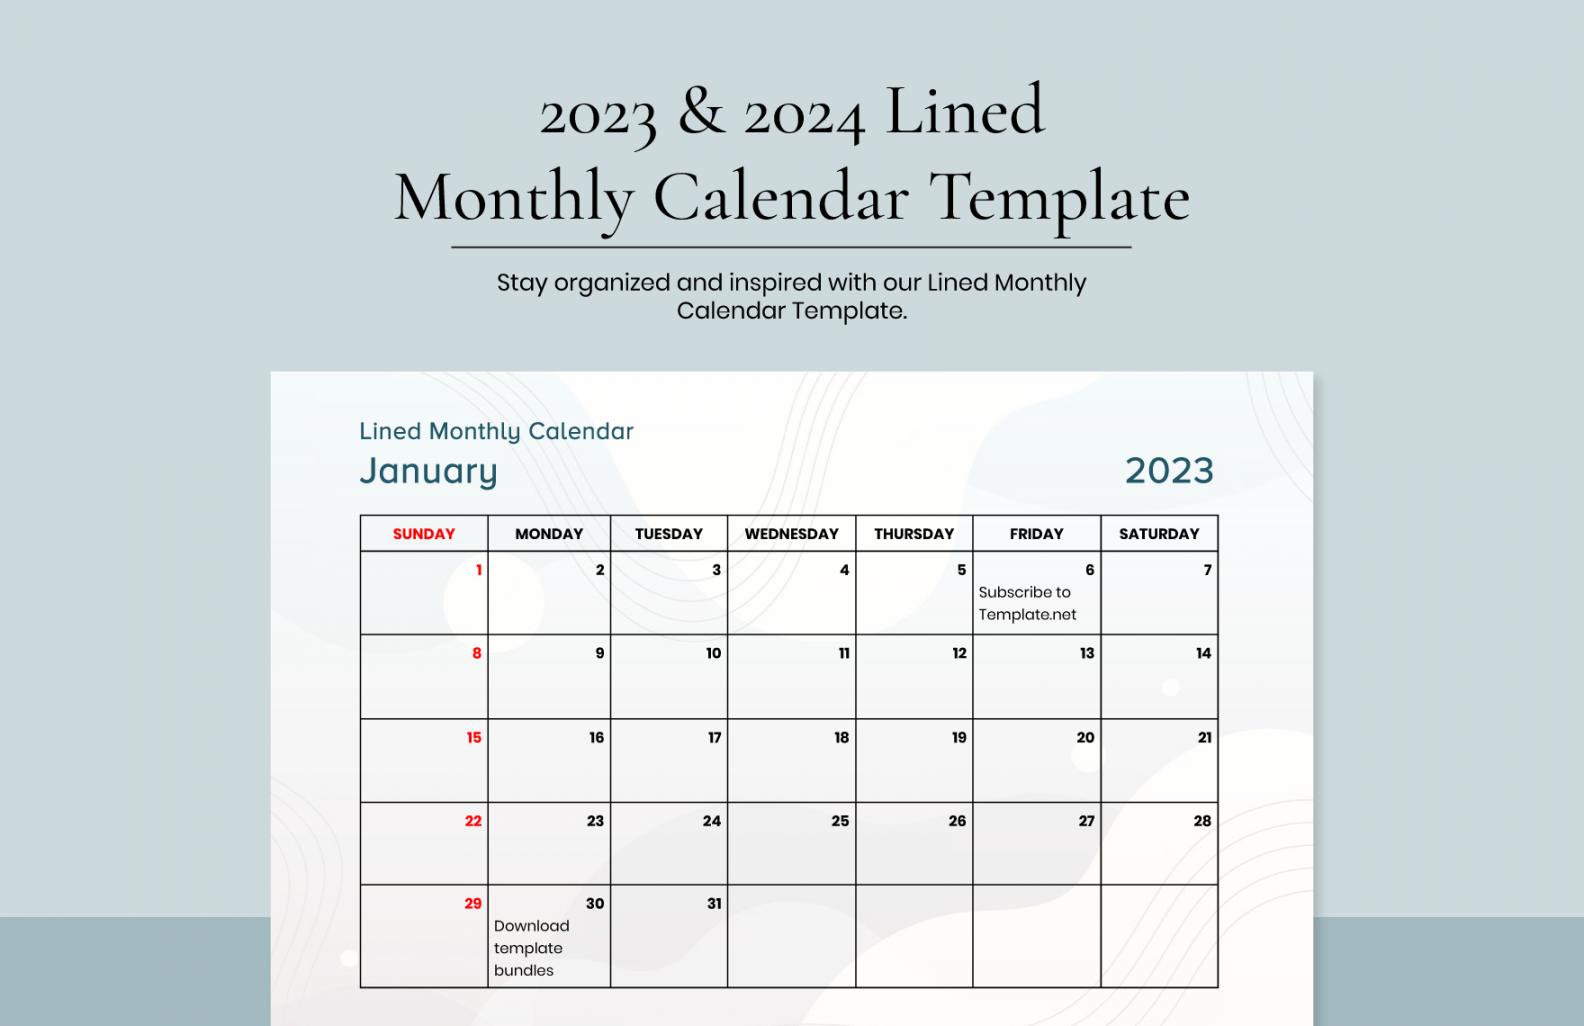 & Lined Monthly Calendar Template - Download in Word